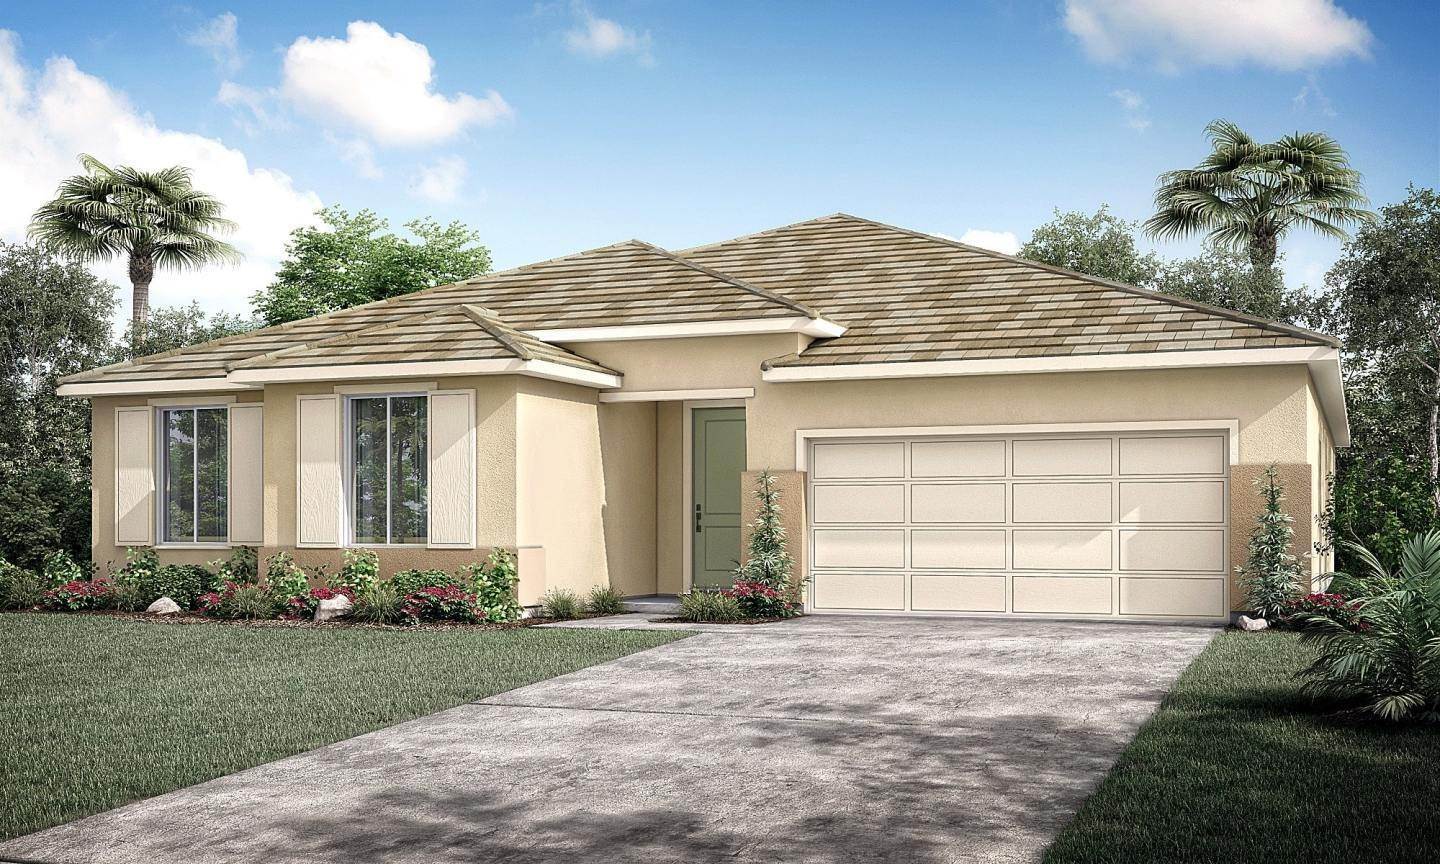 Single Family for Active at The Acres At Copper Heights - Cypress Morrison St. & Tulare Ave TULARE, CALIFORNIA 93274 UNITED STATES